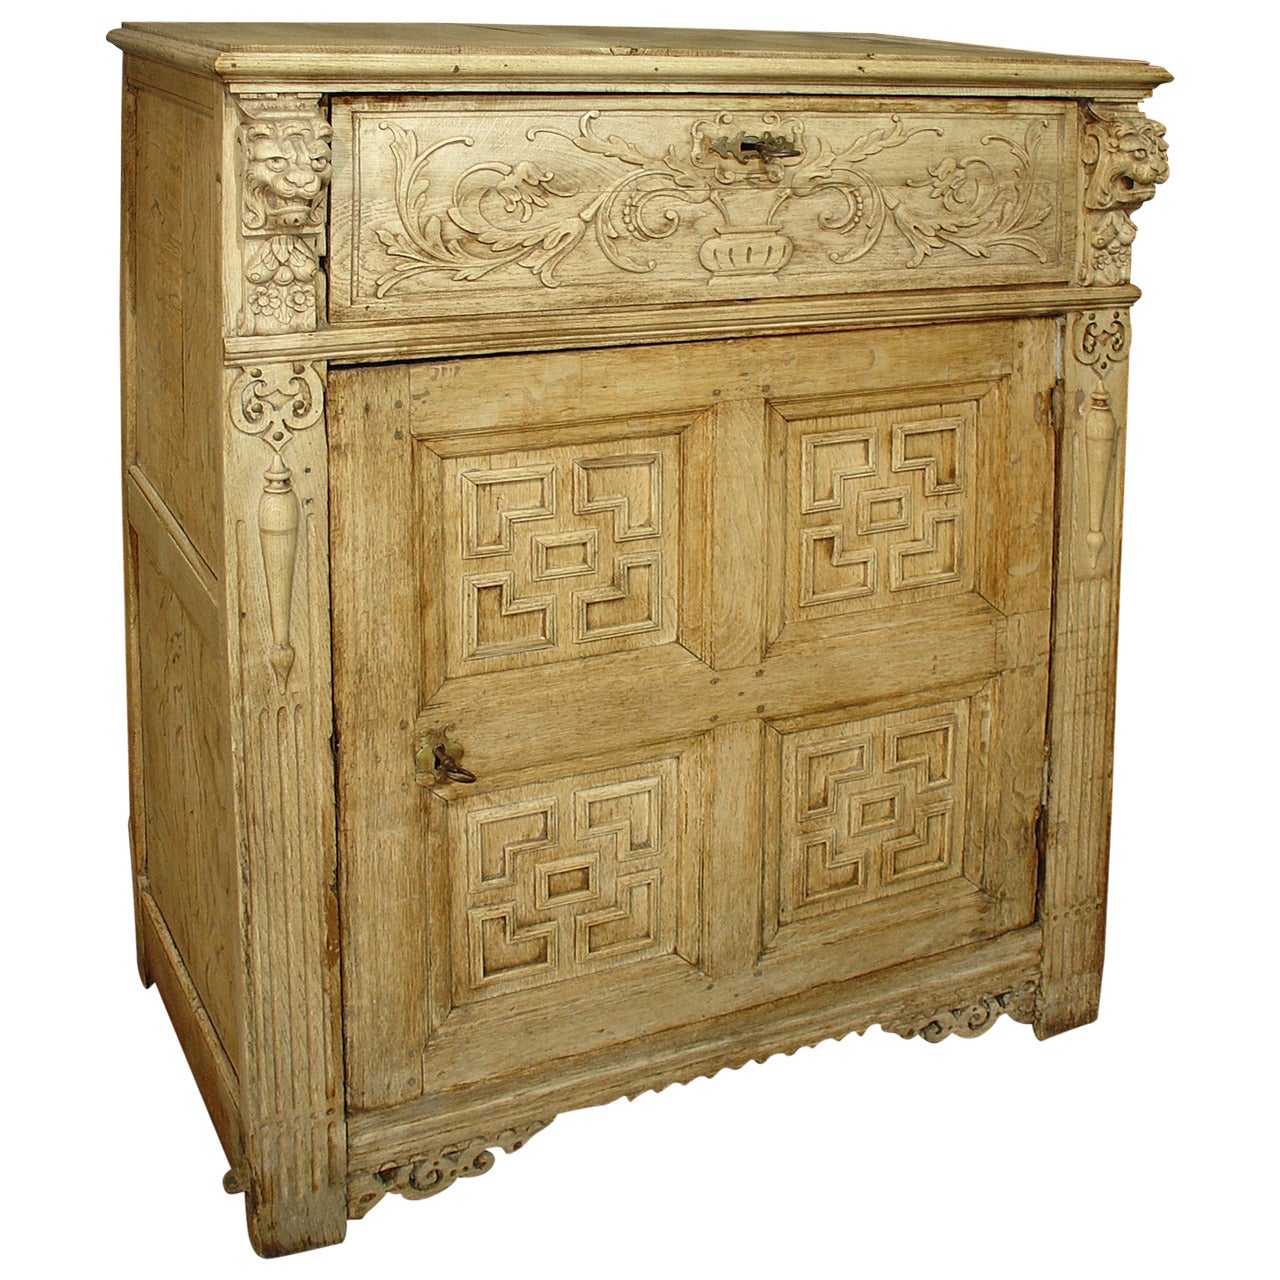 Large 19th Century Stripped Oak Confiturier from France